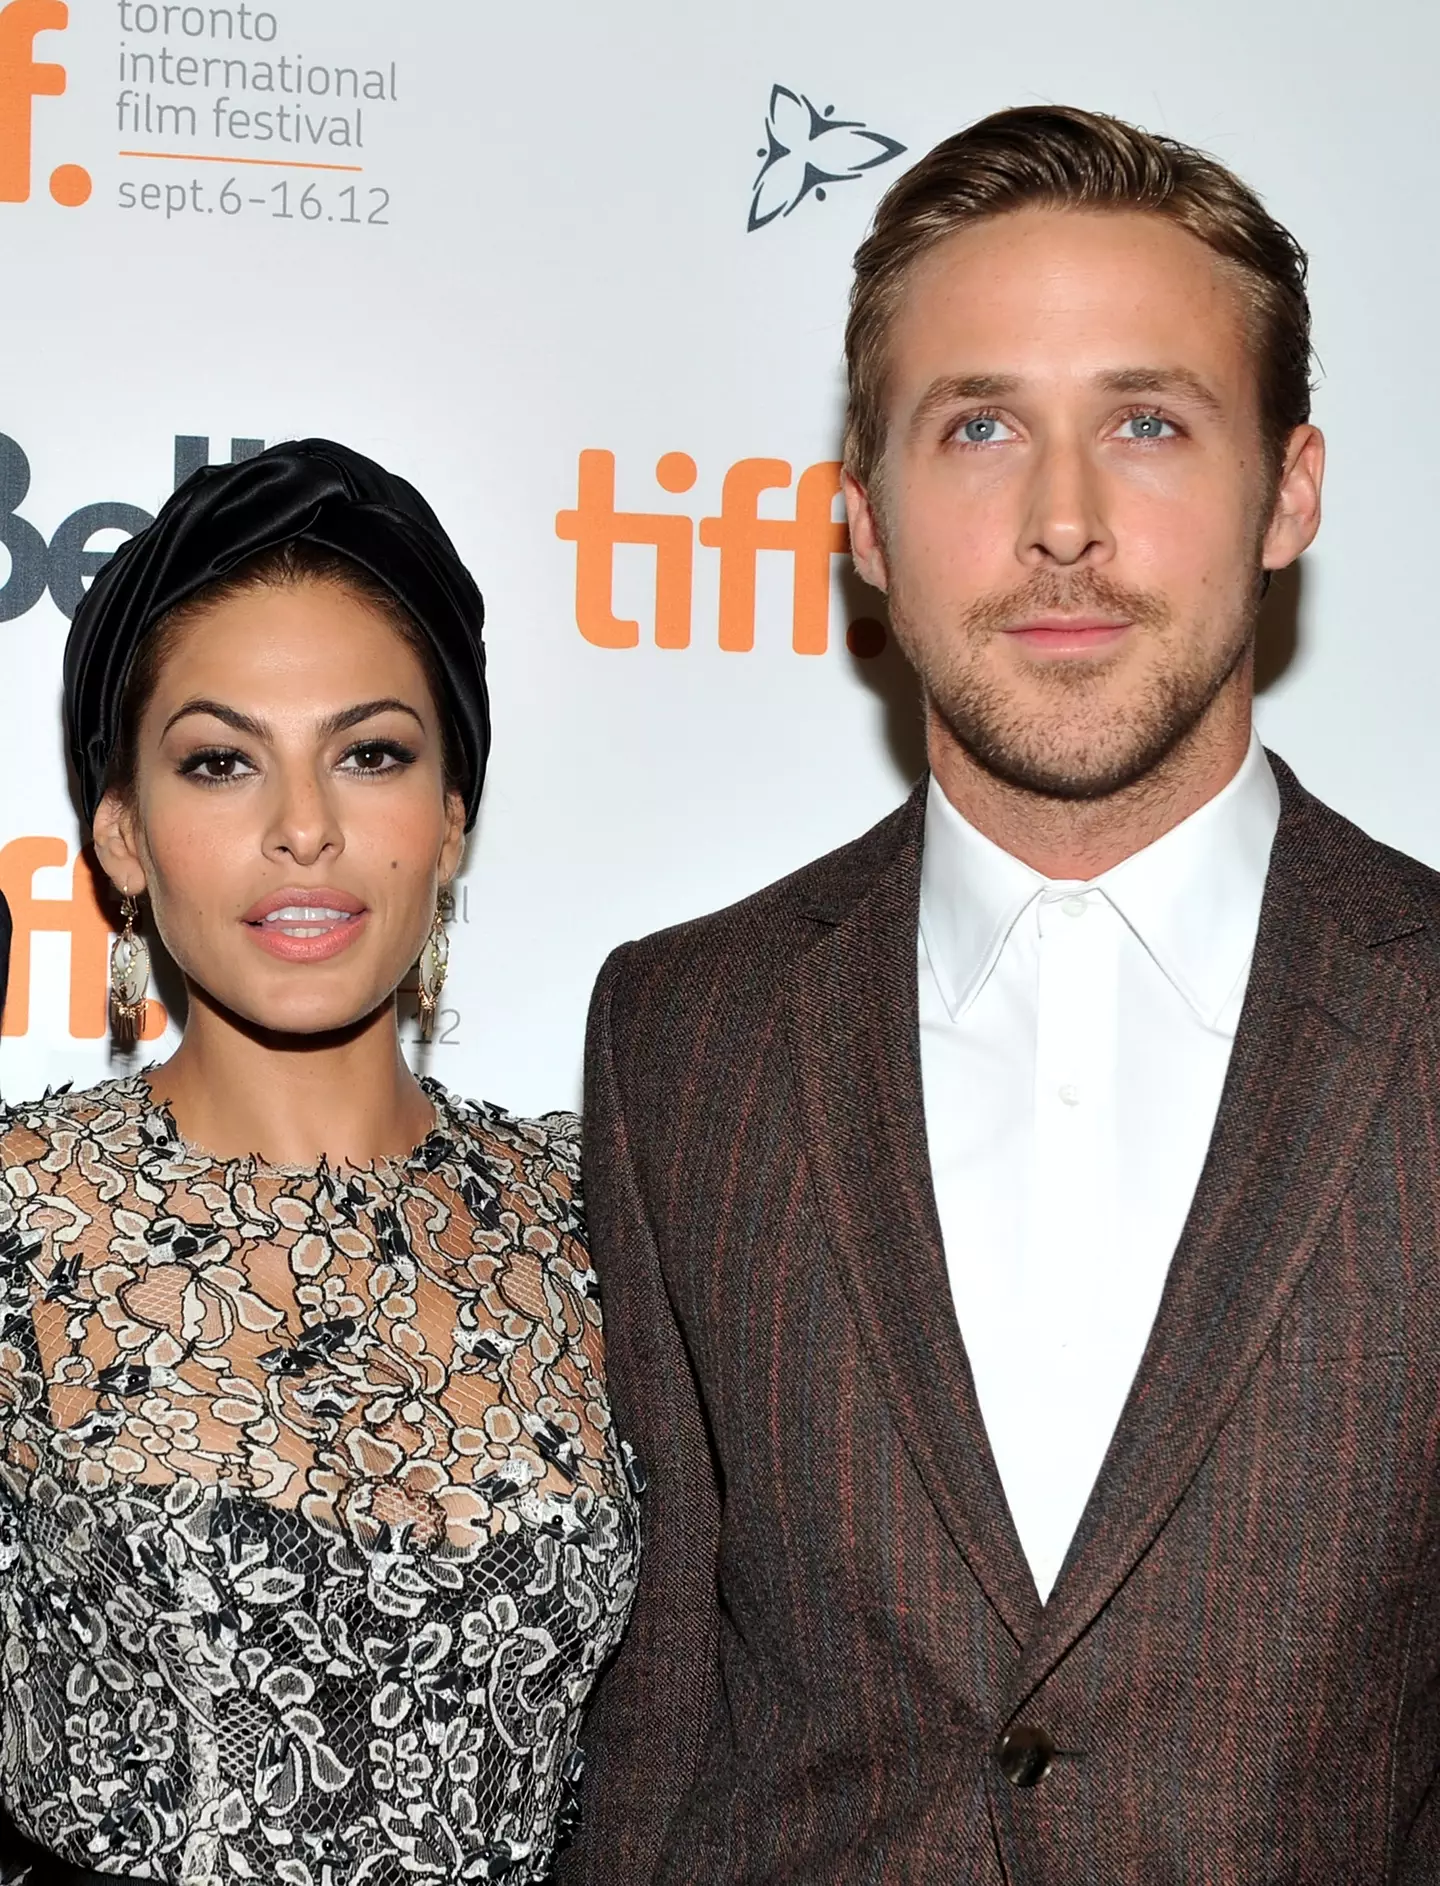 Ryan Gosling has frequently gushed over wife Eva during acceptance speeches.